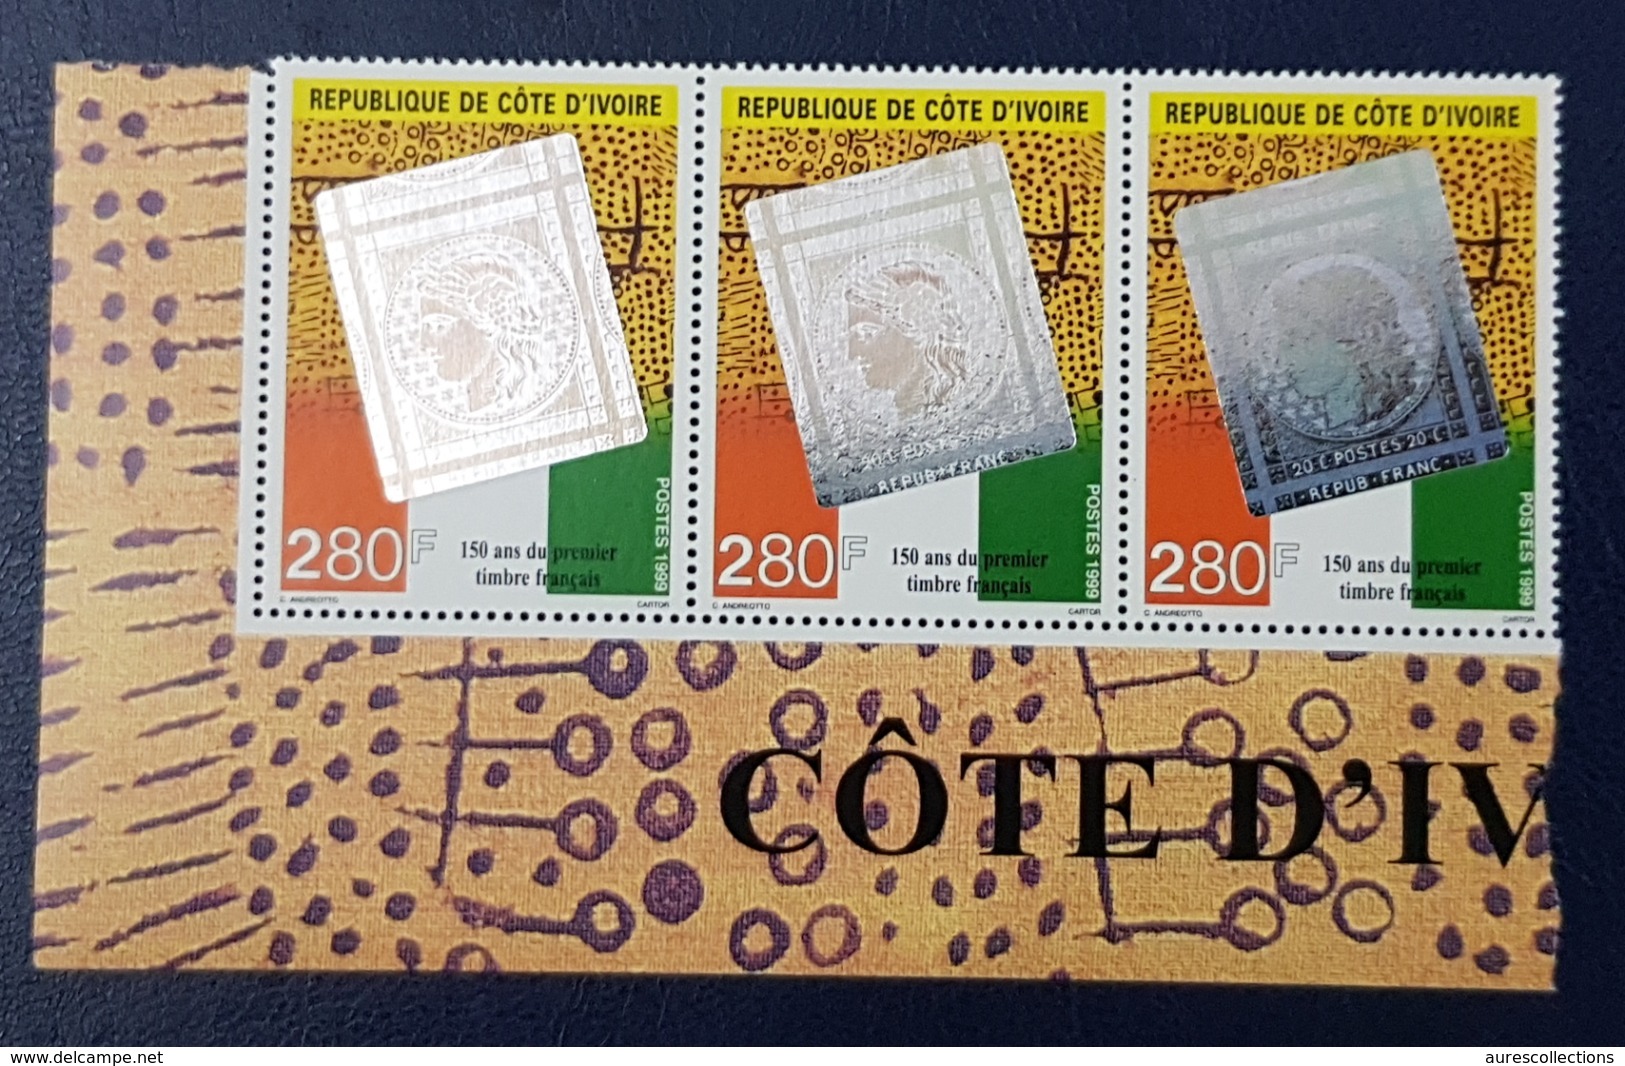 COTE D'IVOIRE IVORY COAST 1999 - 3 X - PHILEXAFRIQUE FIRST FRENCH STAMP TIMBRE FRANCAIS HOLOGRAM - MNH - Ologrammi